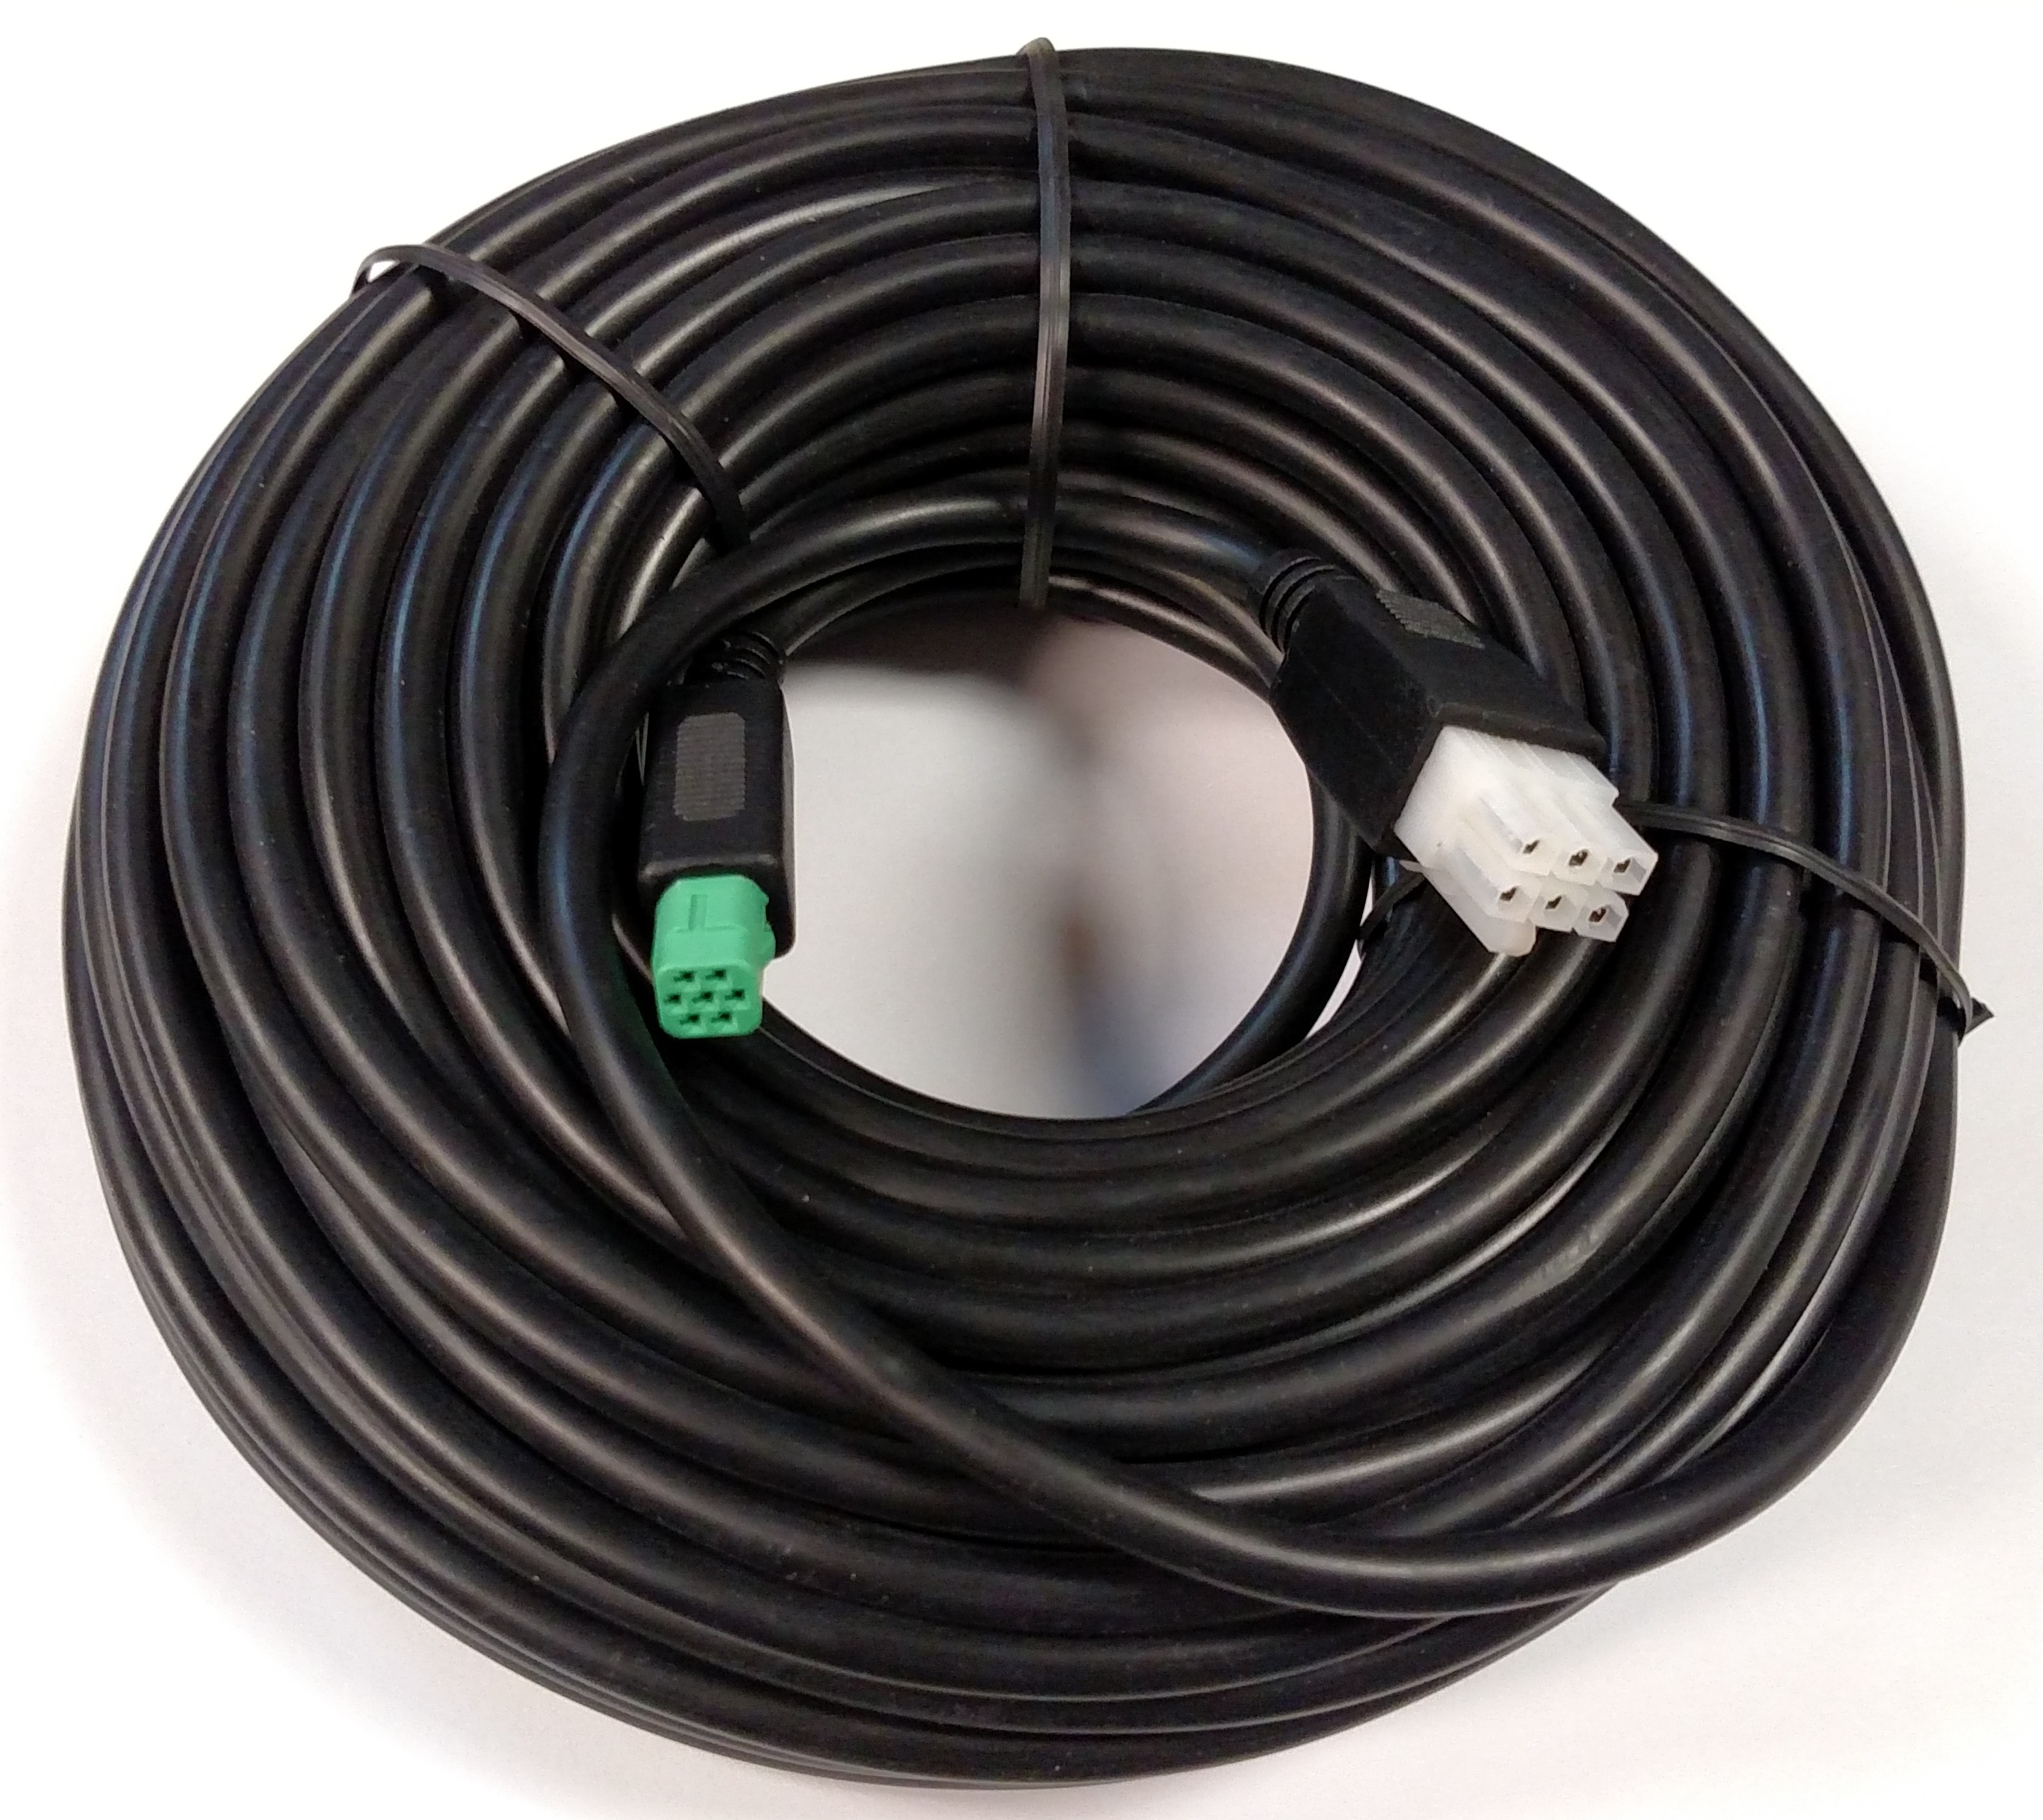 65' Cable for CVS300 to connect with XS91201B and XS90206M9B Camera